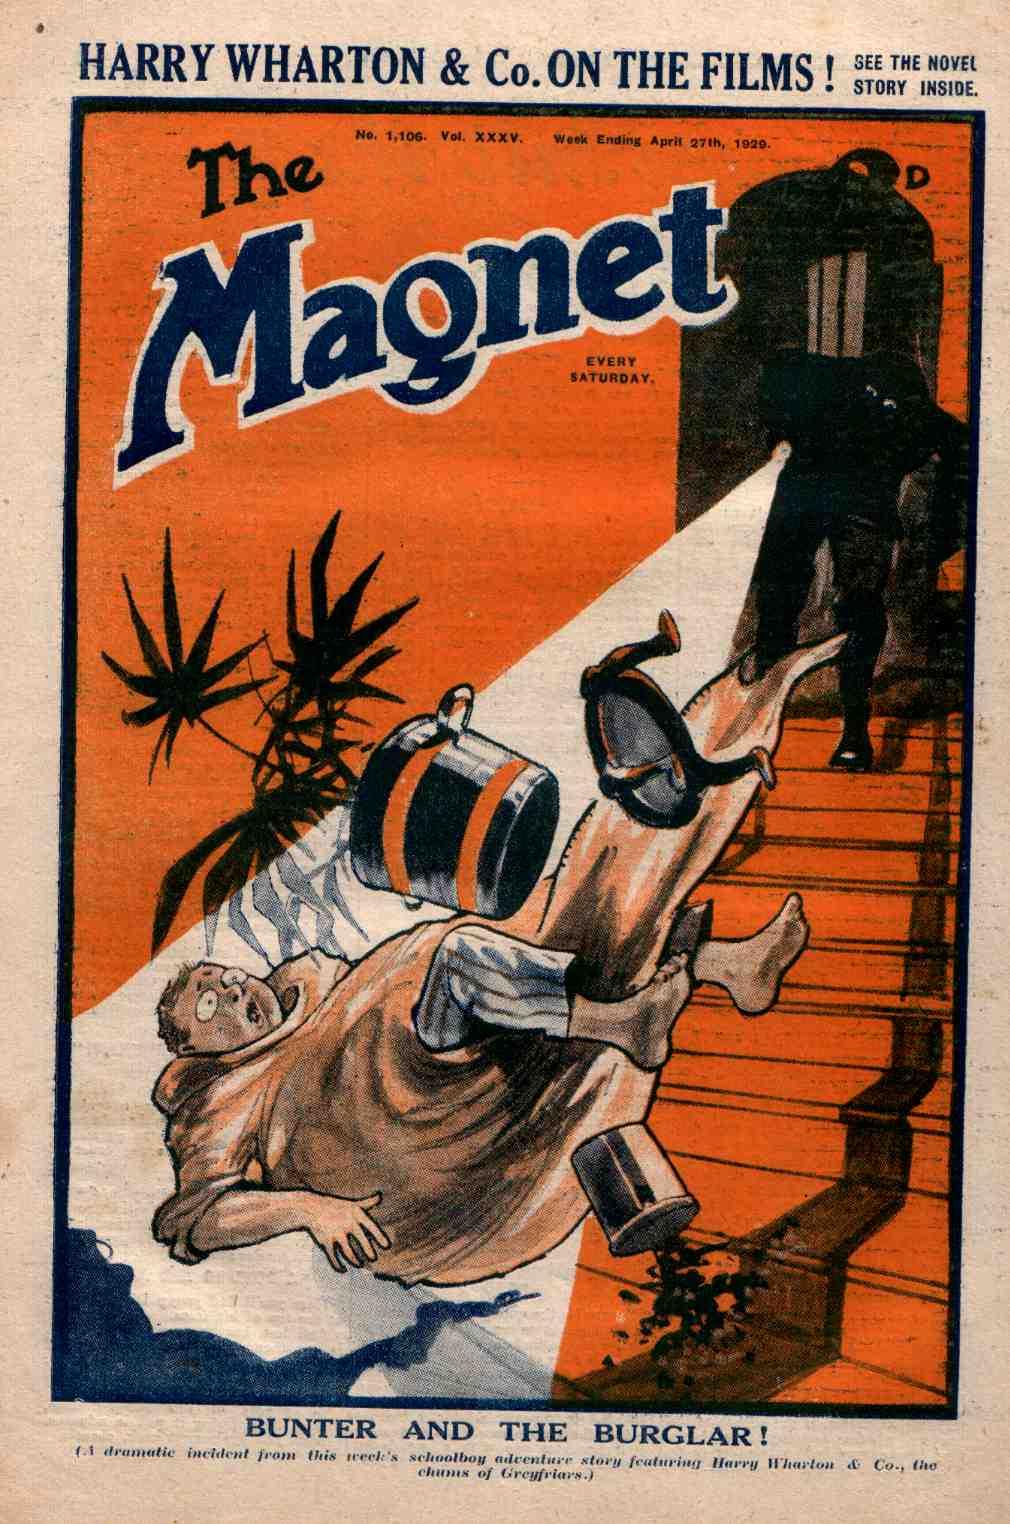 Book Cover For The Magnet 1106 - All Through Bunter!